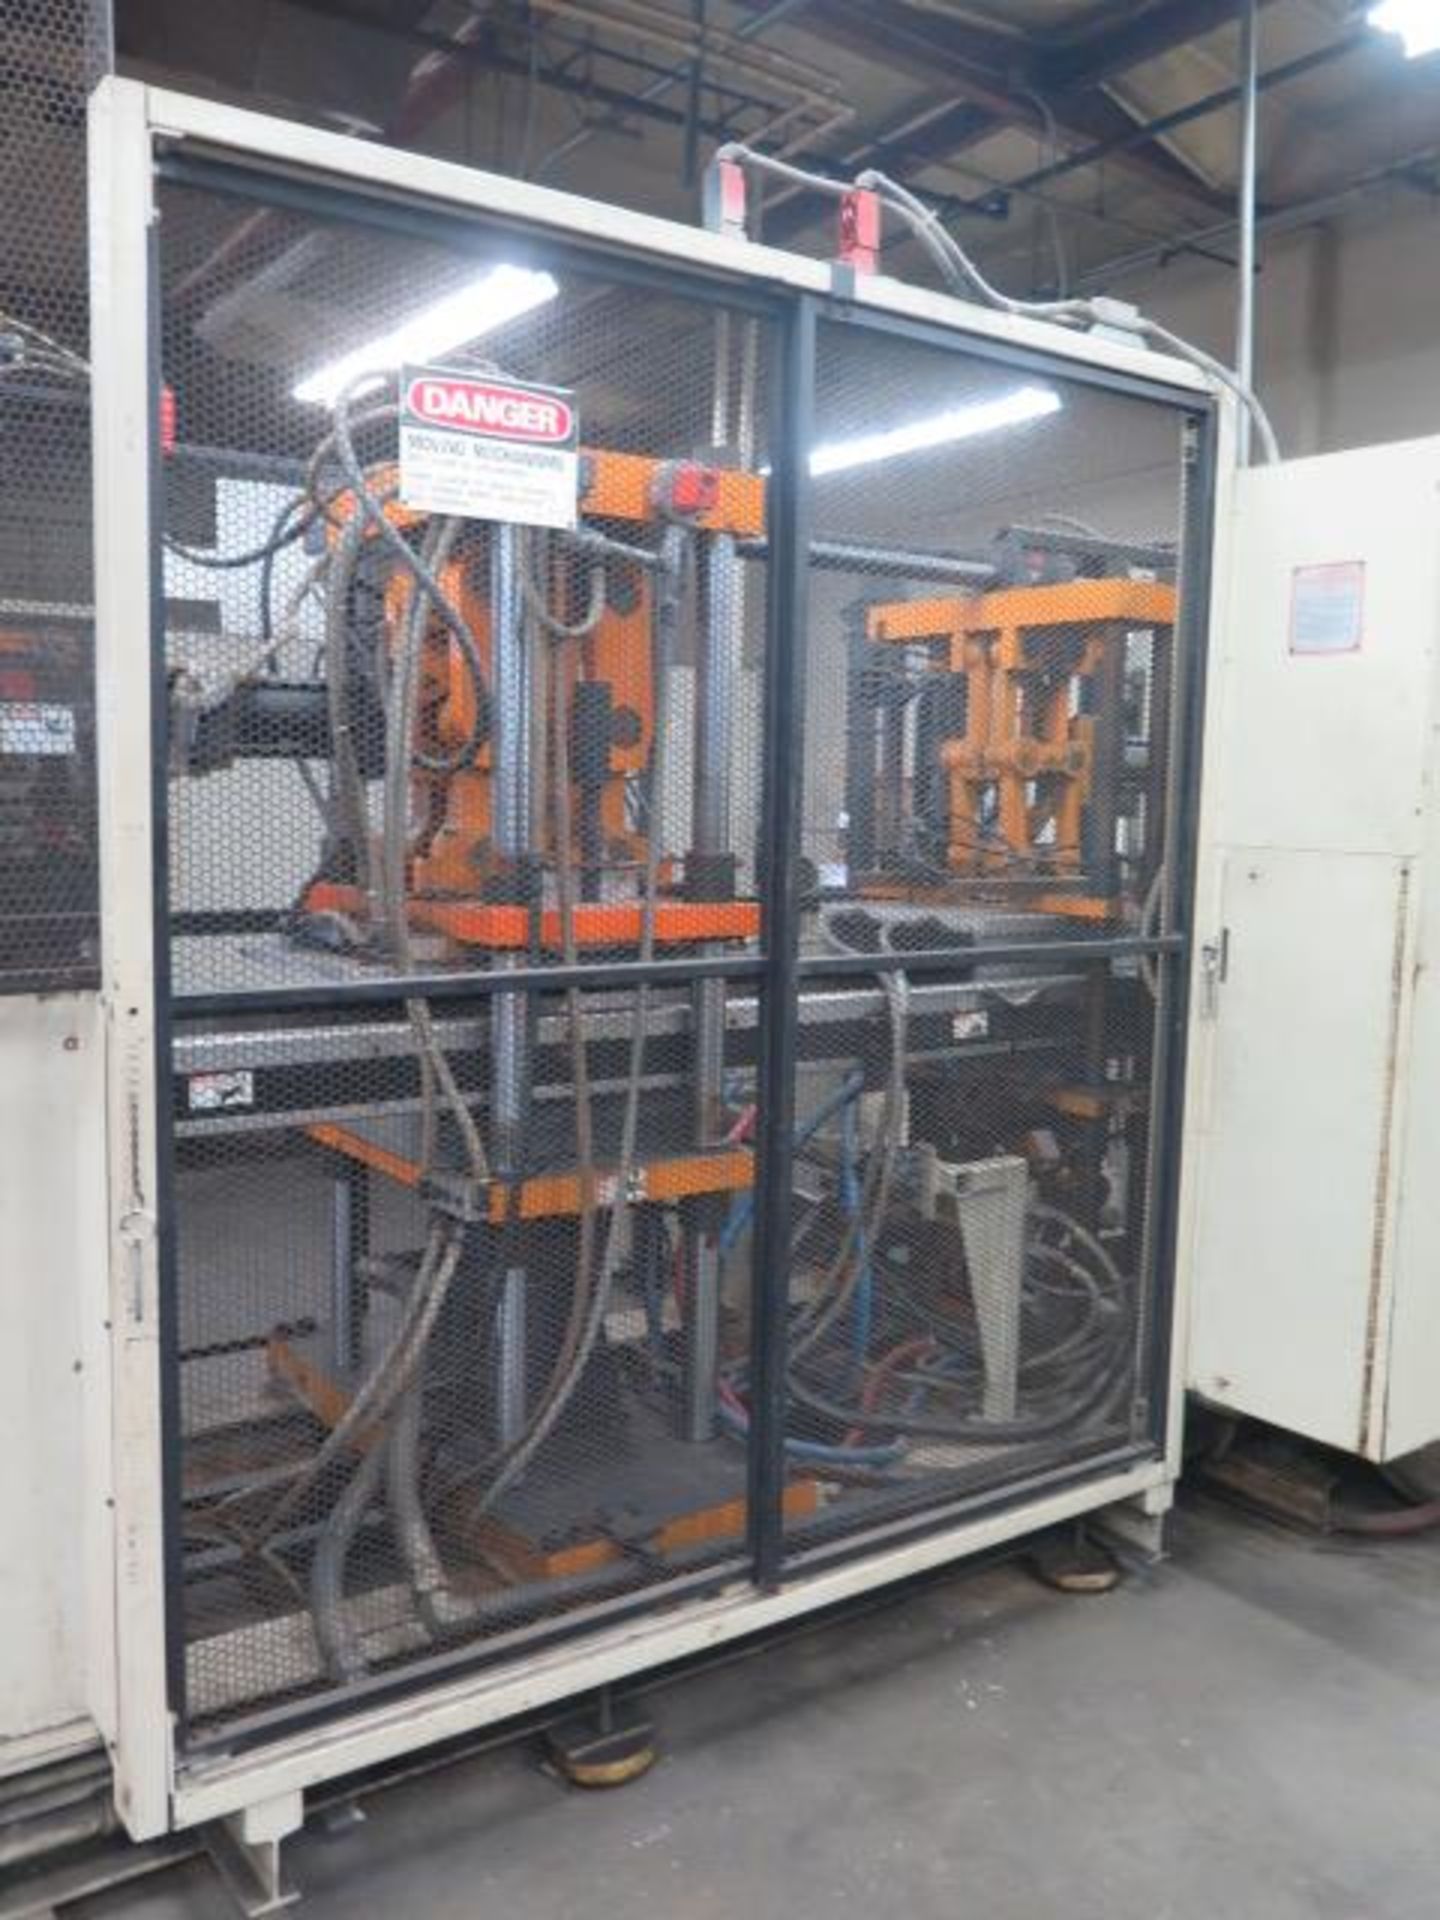 Sencorp Systems mdl. 2200 Thermoforming s/n 92214295 w/ Sencorp Controls, Film Preheater, SOLD AS IS - Image 27 of 28